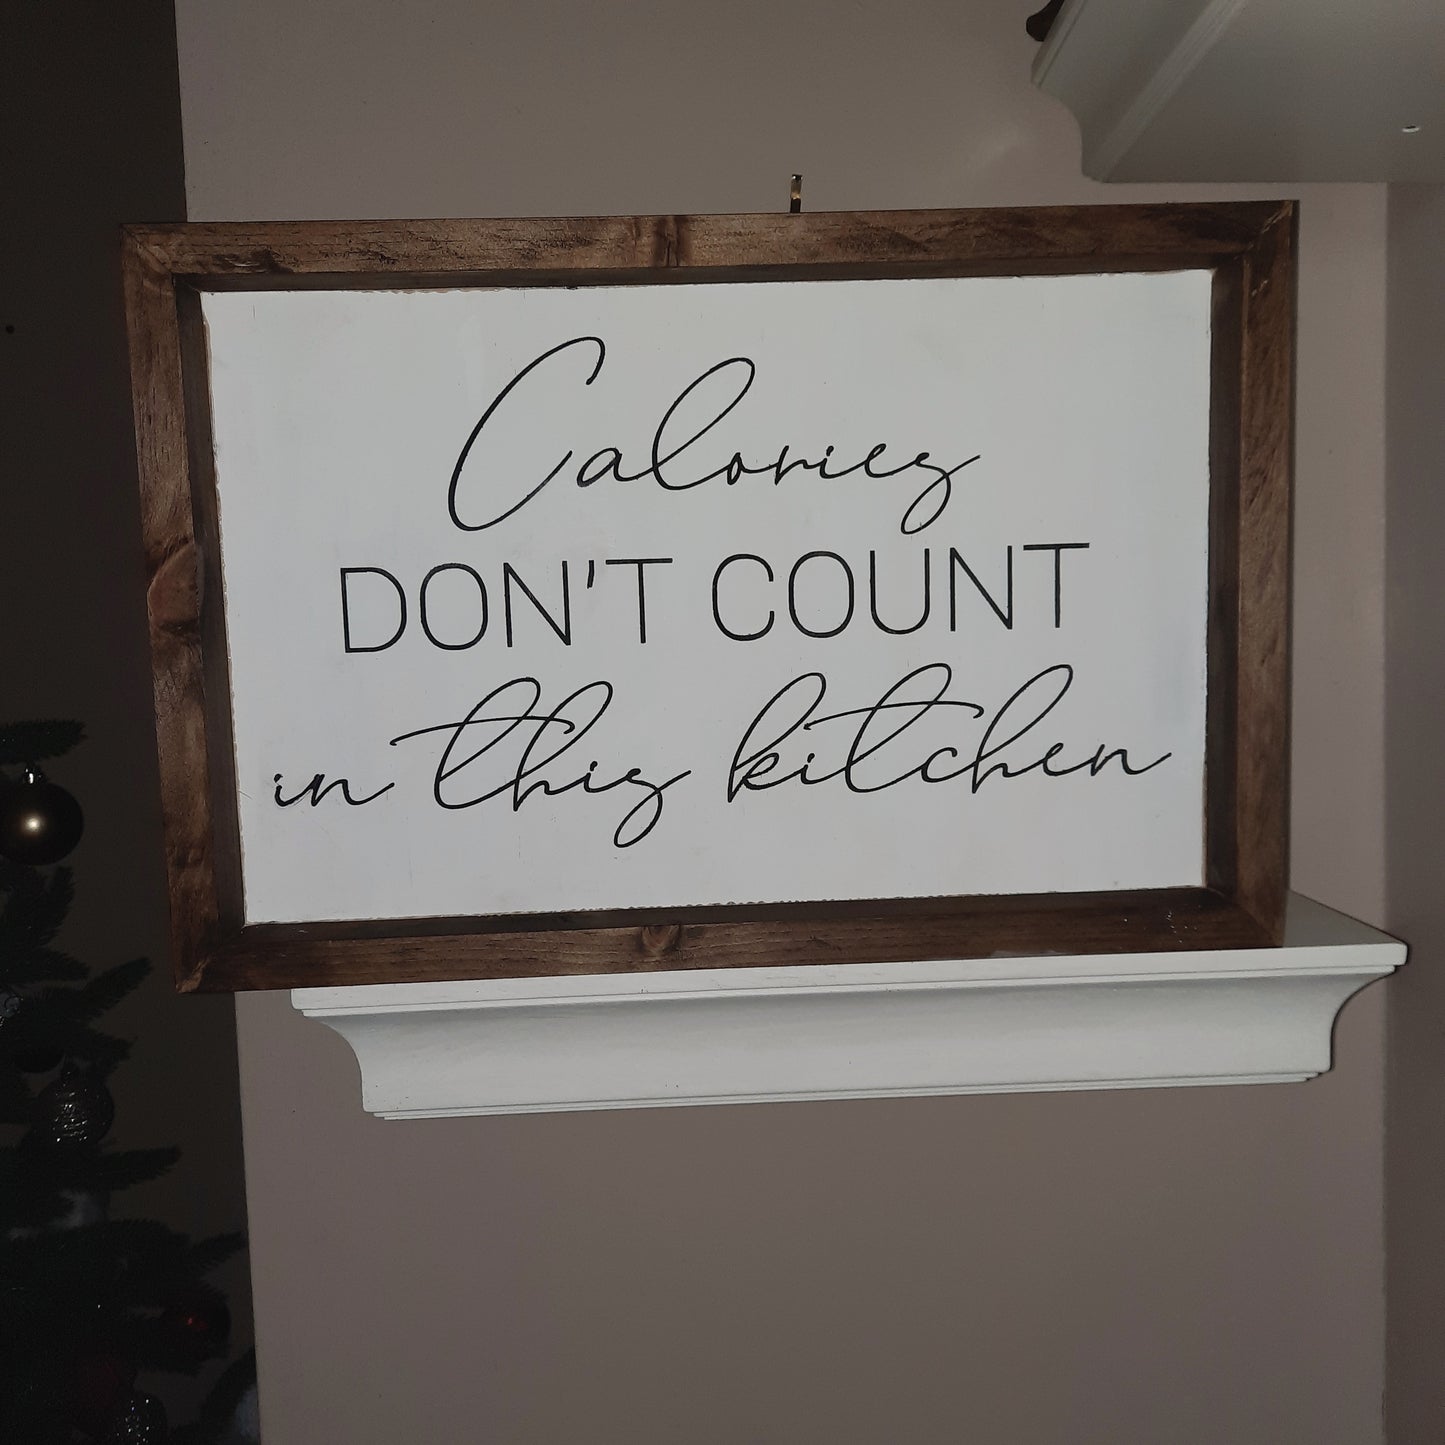 Calories don't count in this kitchen